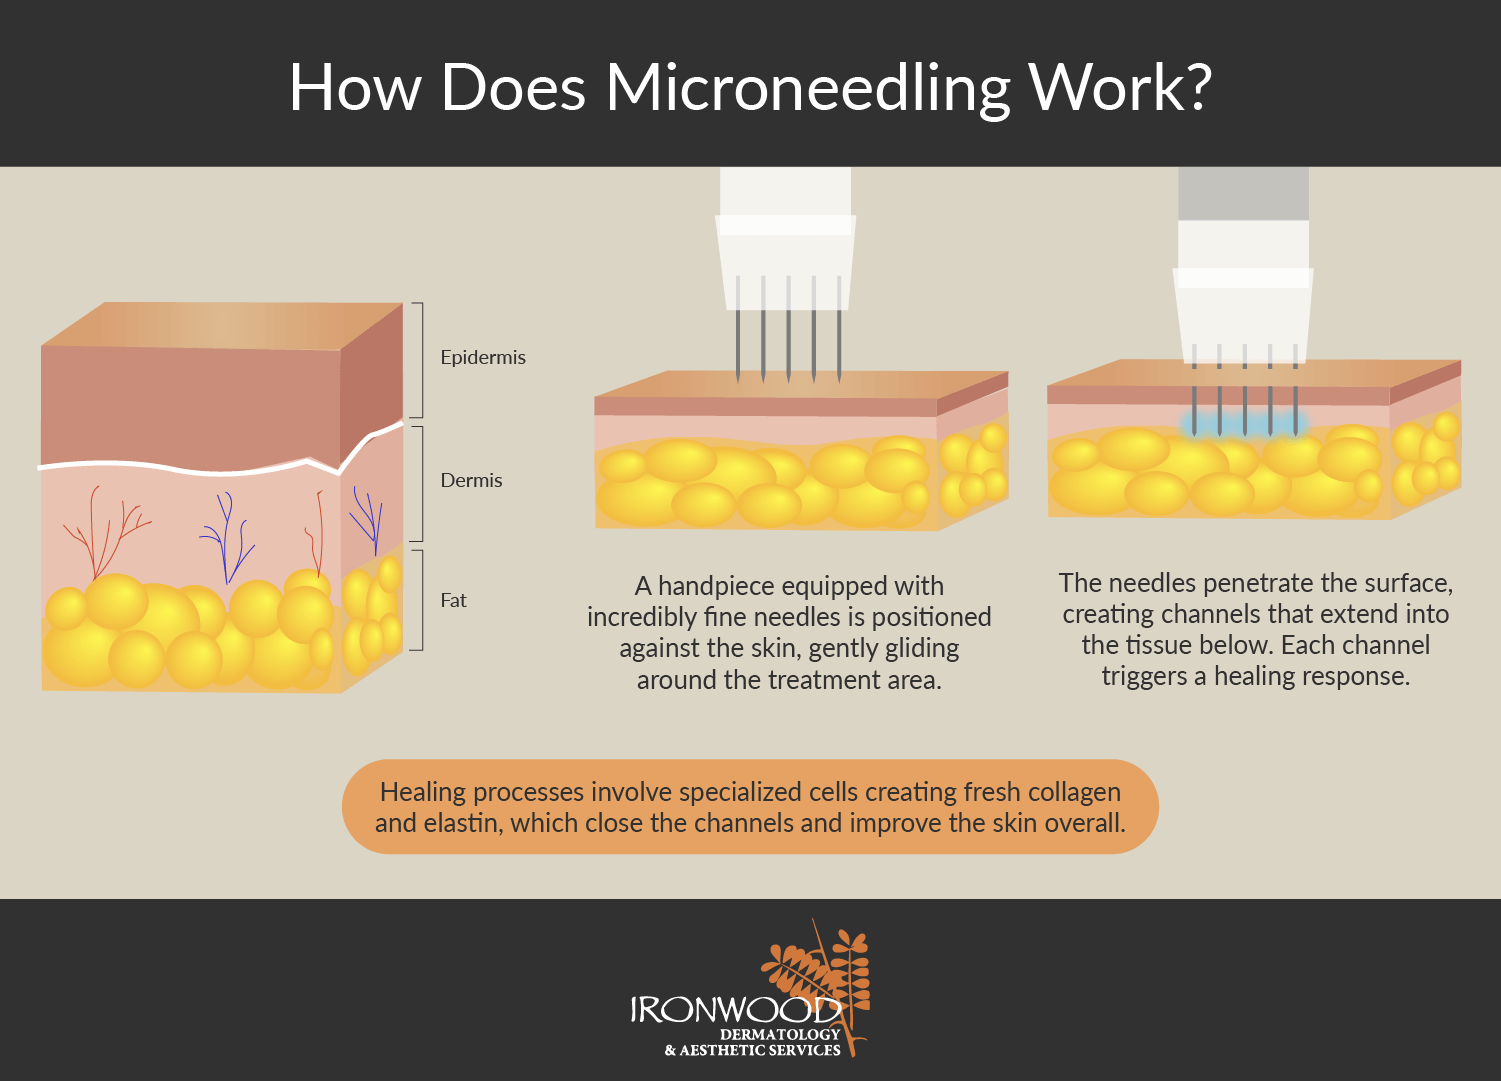  See how microneedling works at Oro Valley and Tucson’s Ironwood Dermatology.